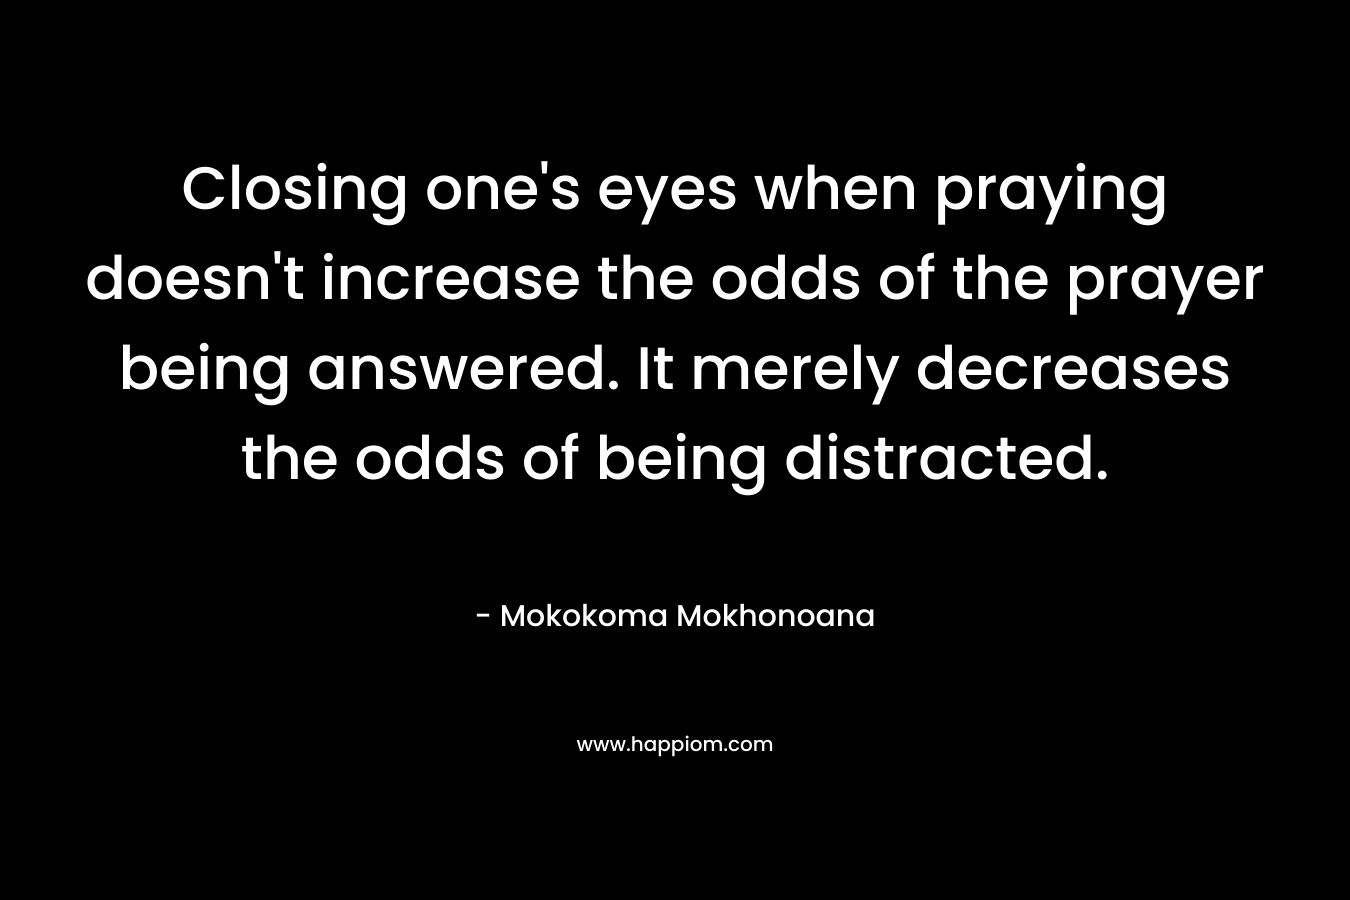 Closing one’s eyes when praying doesn’t increase the odds of the prayer being answered. It merely decreases the odds of being distracted. – Mokokoma Mokhonoana